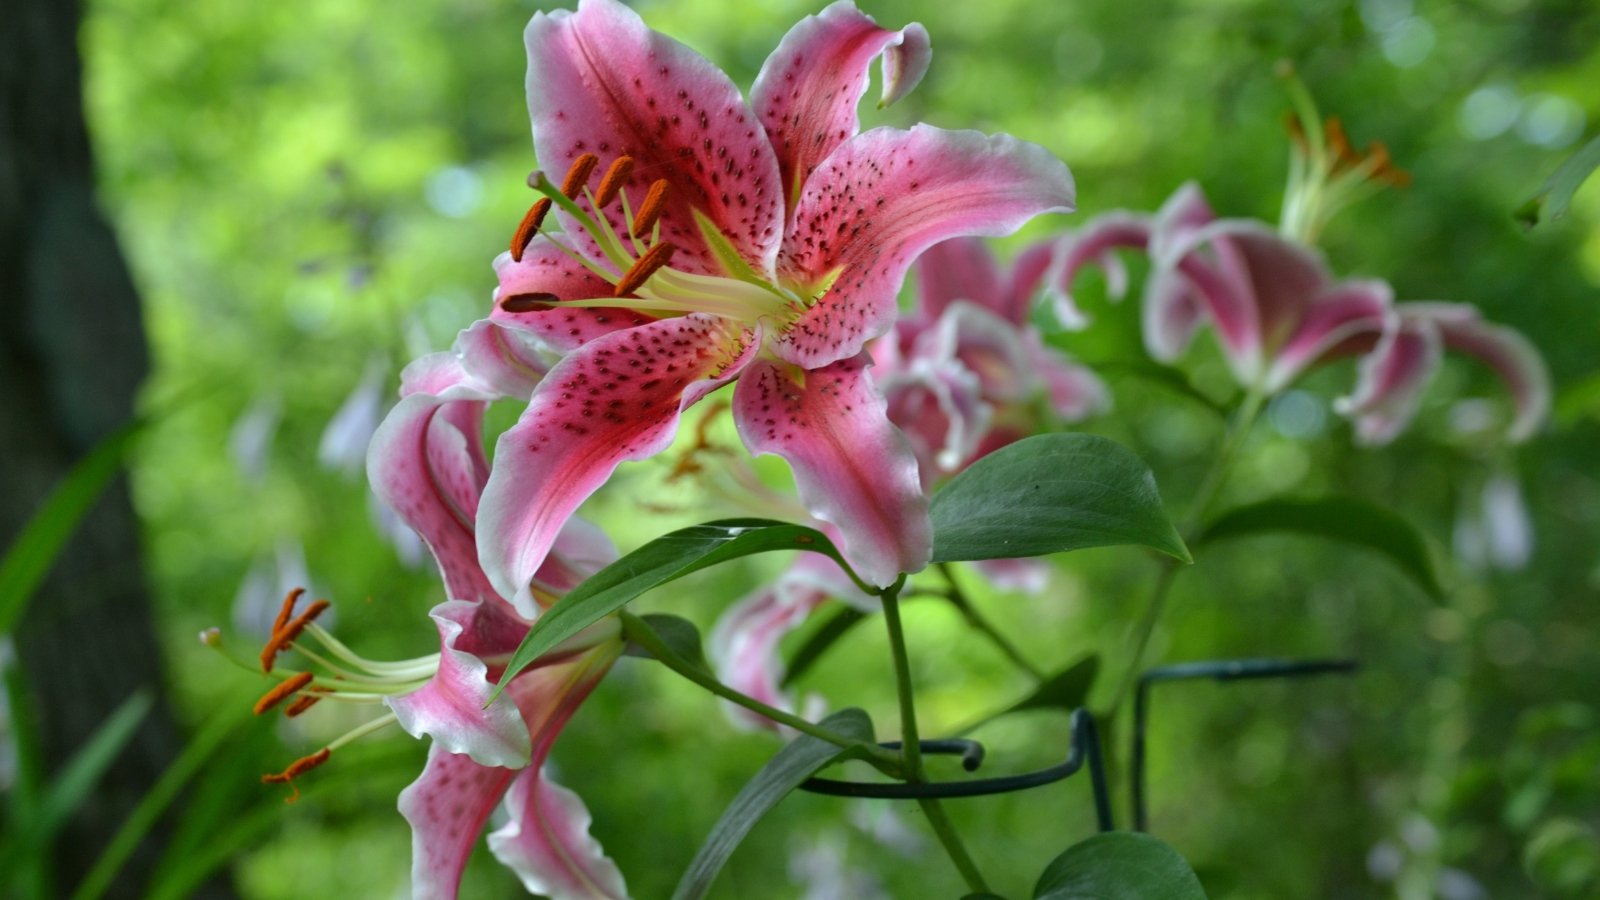 Oriental lilies 'Stargazer' present tall, erect stems and lance-shaped leaves, producing large, star-shaped flowers with prominent stamens, in shades of pink with speckles.
